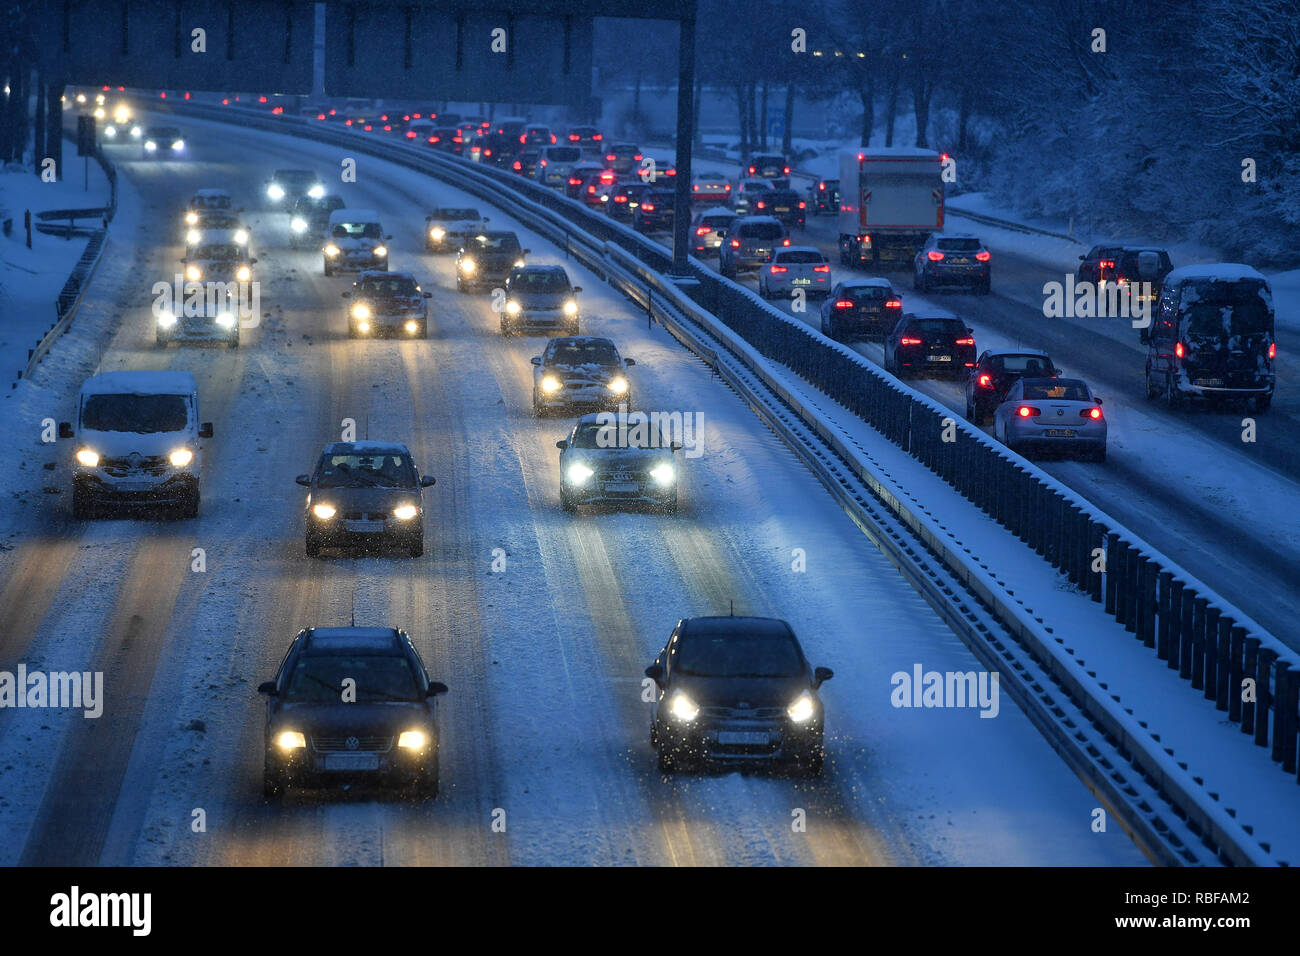 Munich Riem, Deutschland. 10th Jan, 2019. Snow chaos on the streets of Bavaria - as here on the A94 motorway in Muenchen Riem is the busy traffic, commuters in the morning on snow-slick streets. Cars, cars, PKSWs, driving on a snowy road, car traffic, road traffic, Autobahn.Berufsverkehr Continuing snowfall on 10.01.2019, provide for snow chaos, traffic chaos, winter onset in Bavaria. | usage worldwide Credit: dpa/Alamy Live News/Alamy Live News Stock Photo